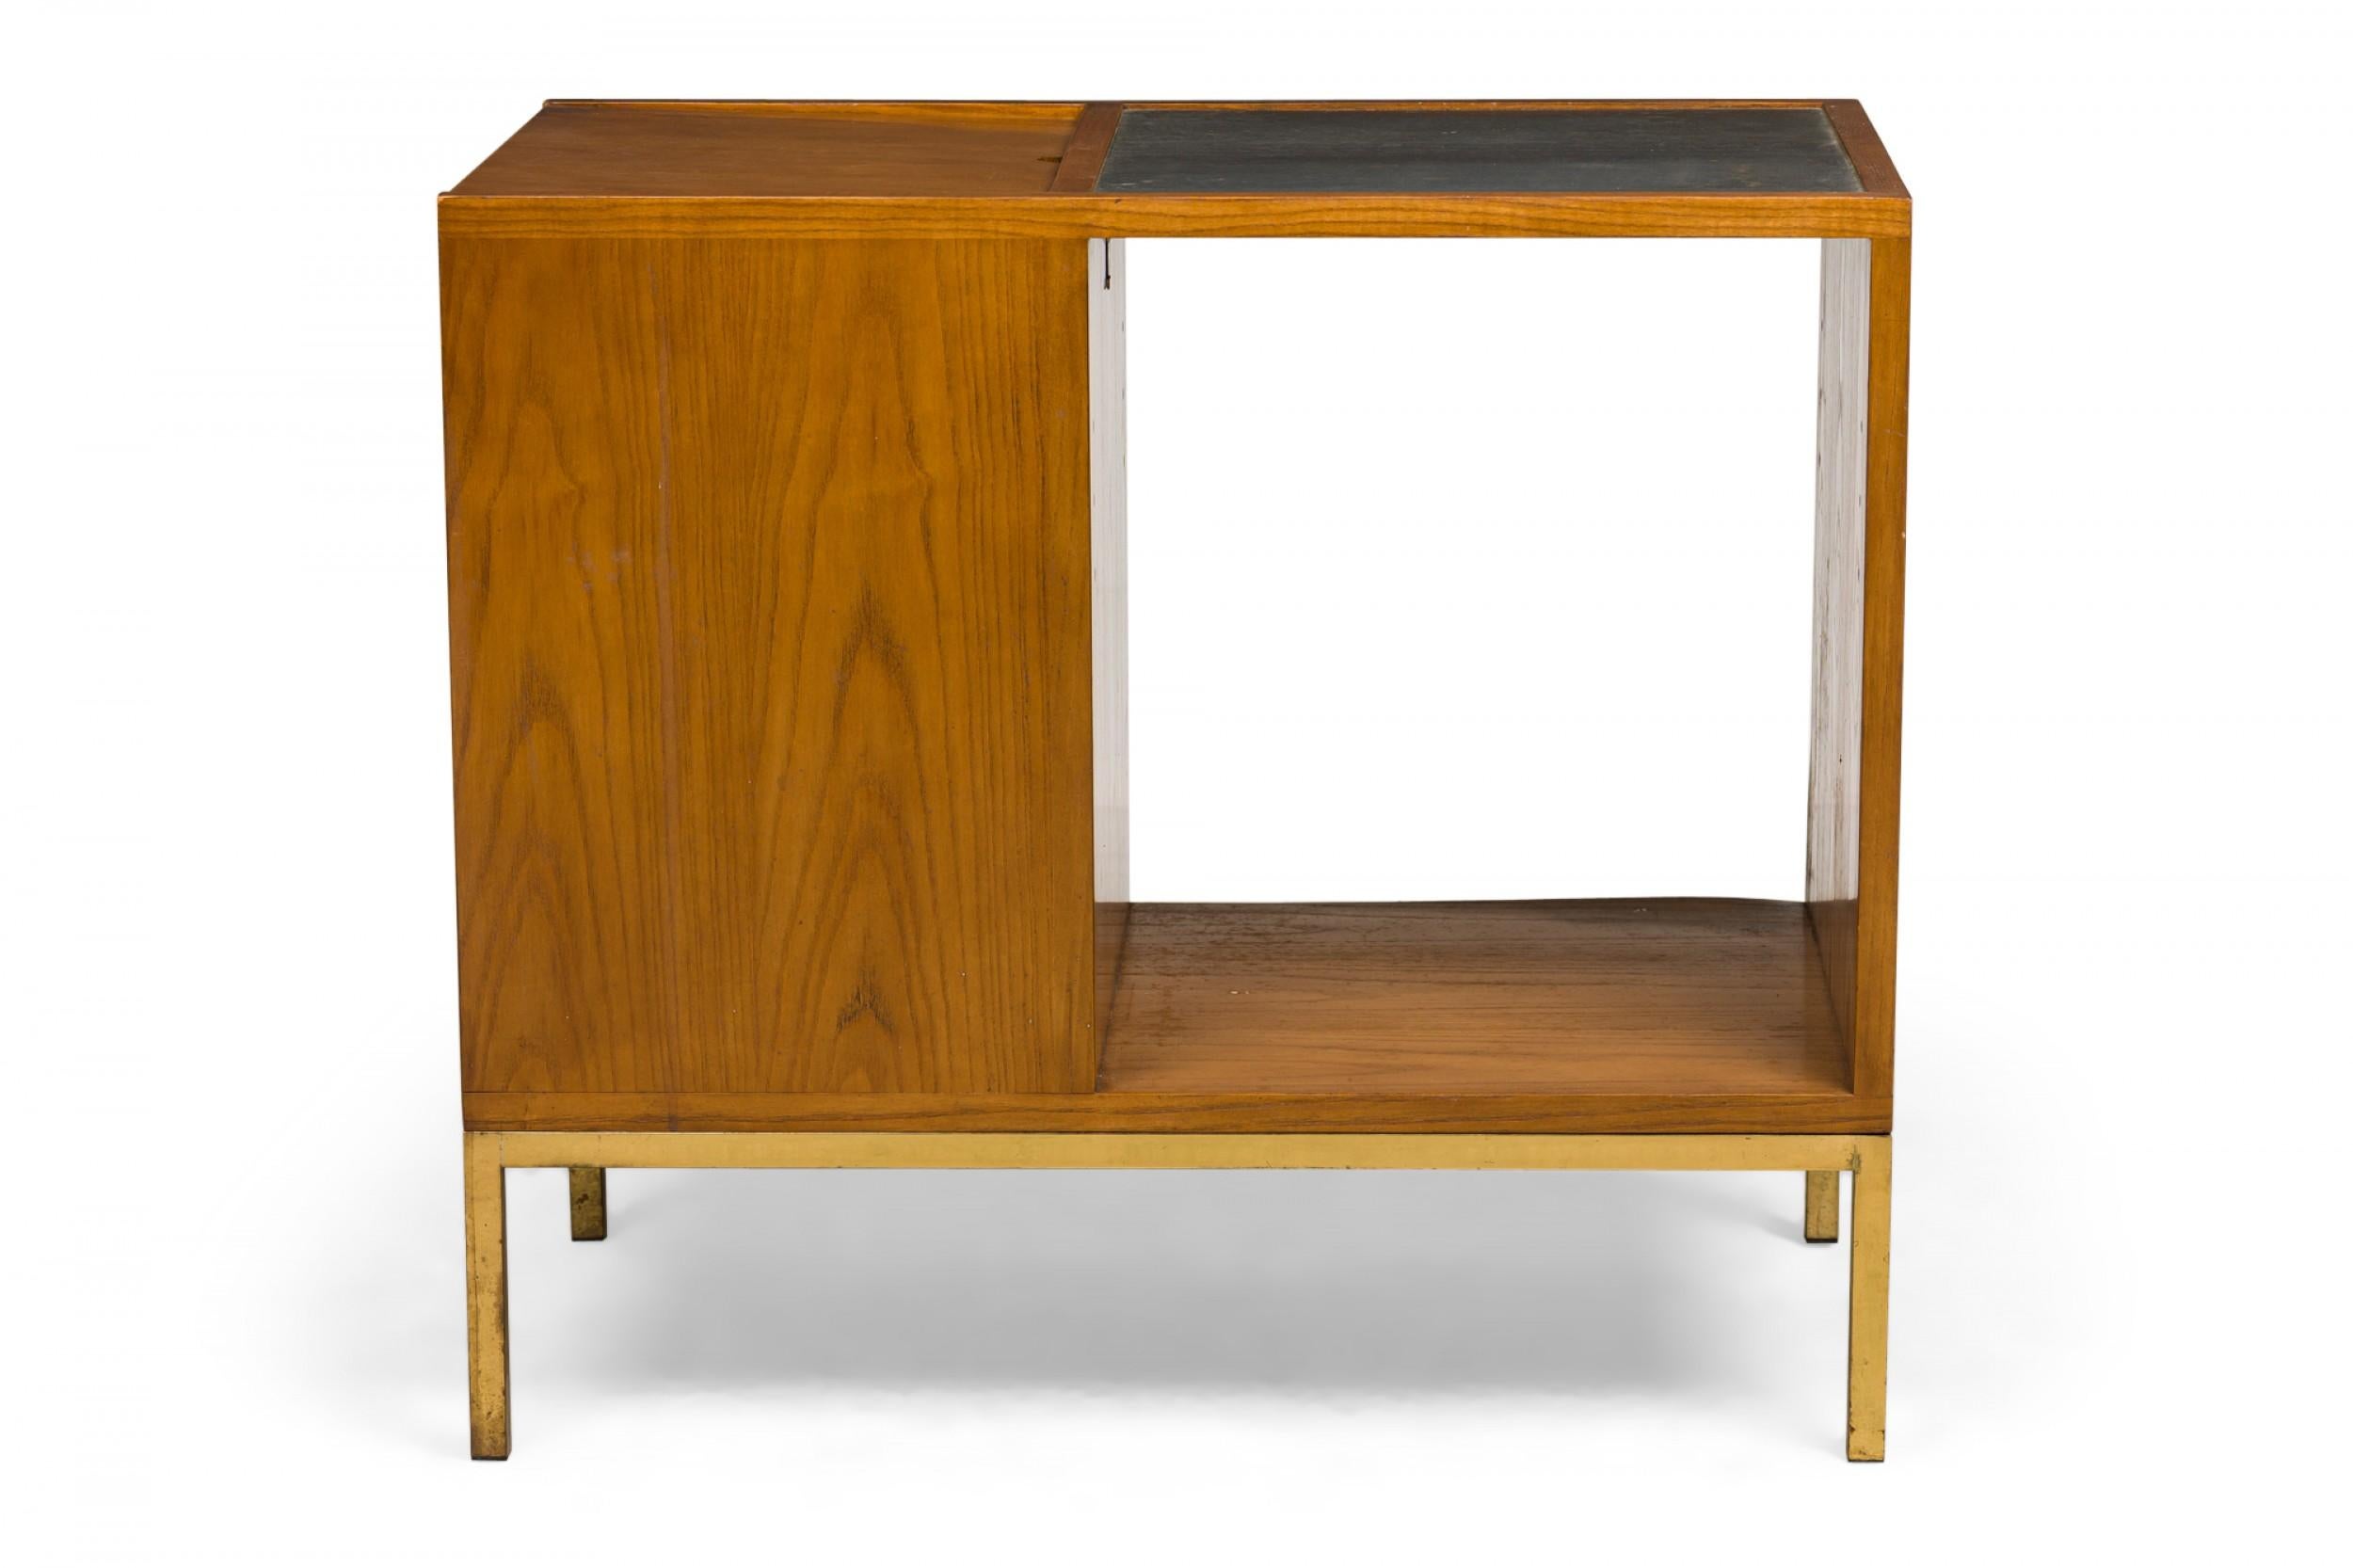 American Mid-Century dry bar cabinet with a walnut case featuring a left-hand closed cabinet next to an open shelf compartment topped with a gray slate serving area, all resting on a polished brass bracket base. (EDWARD WORMLEY FOR DUNBAR FURNITURE